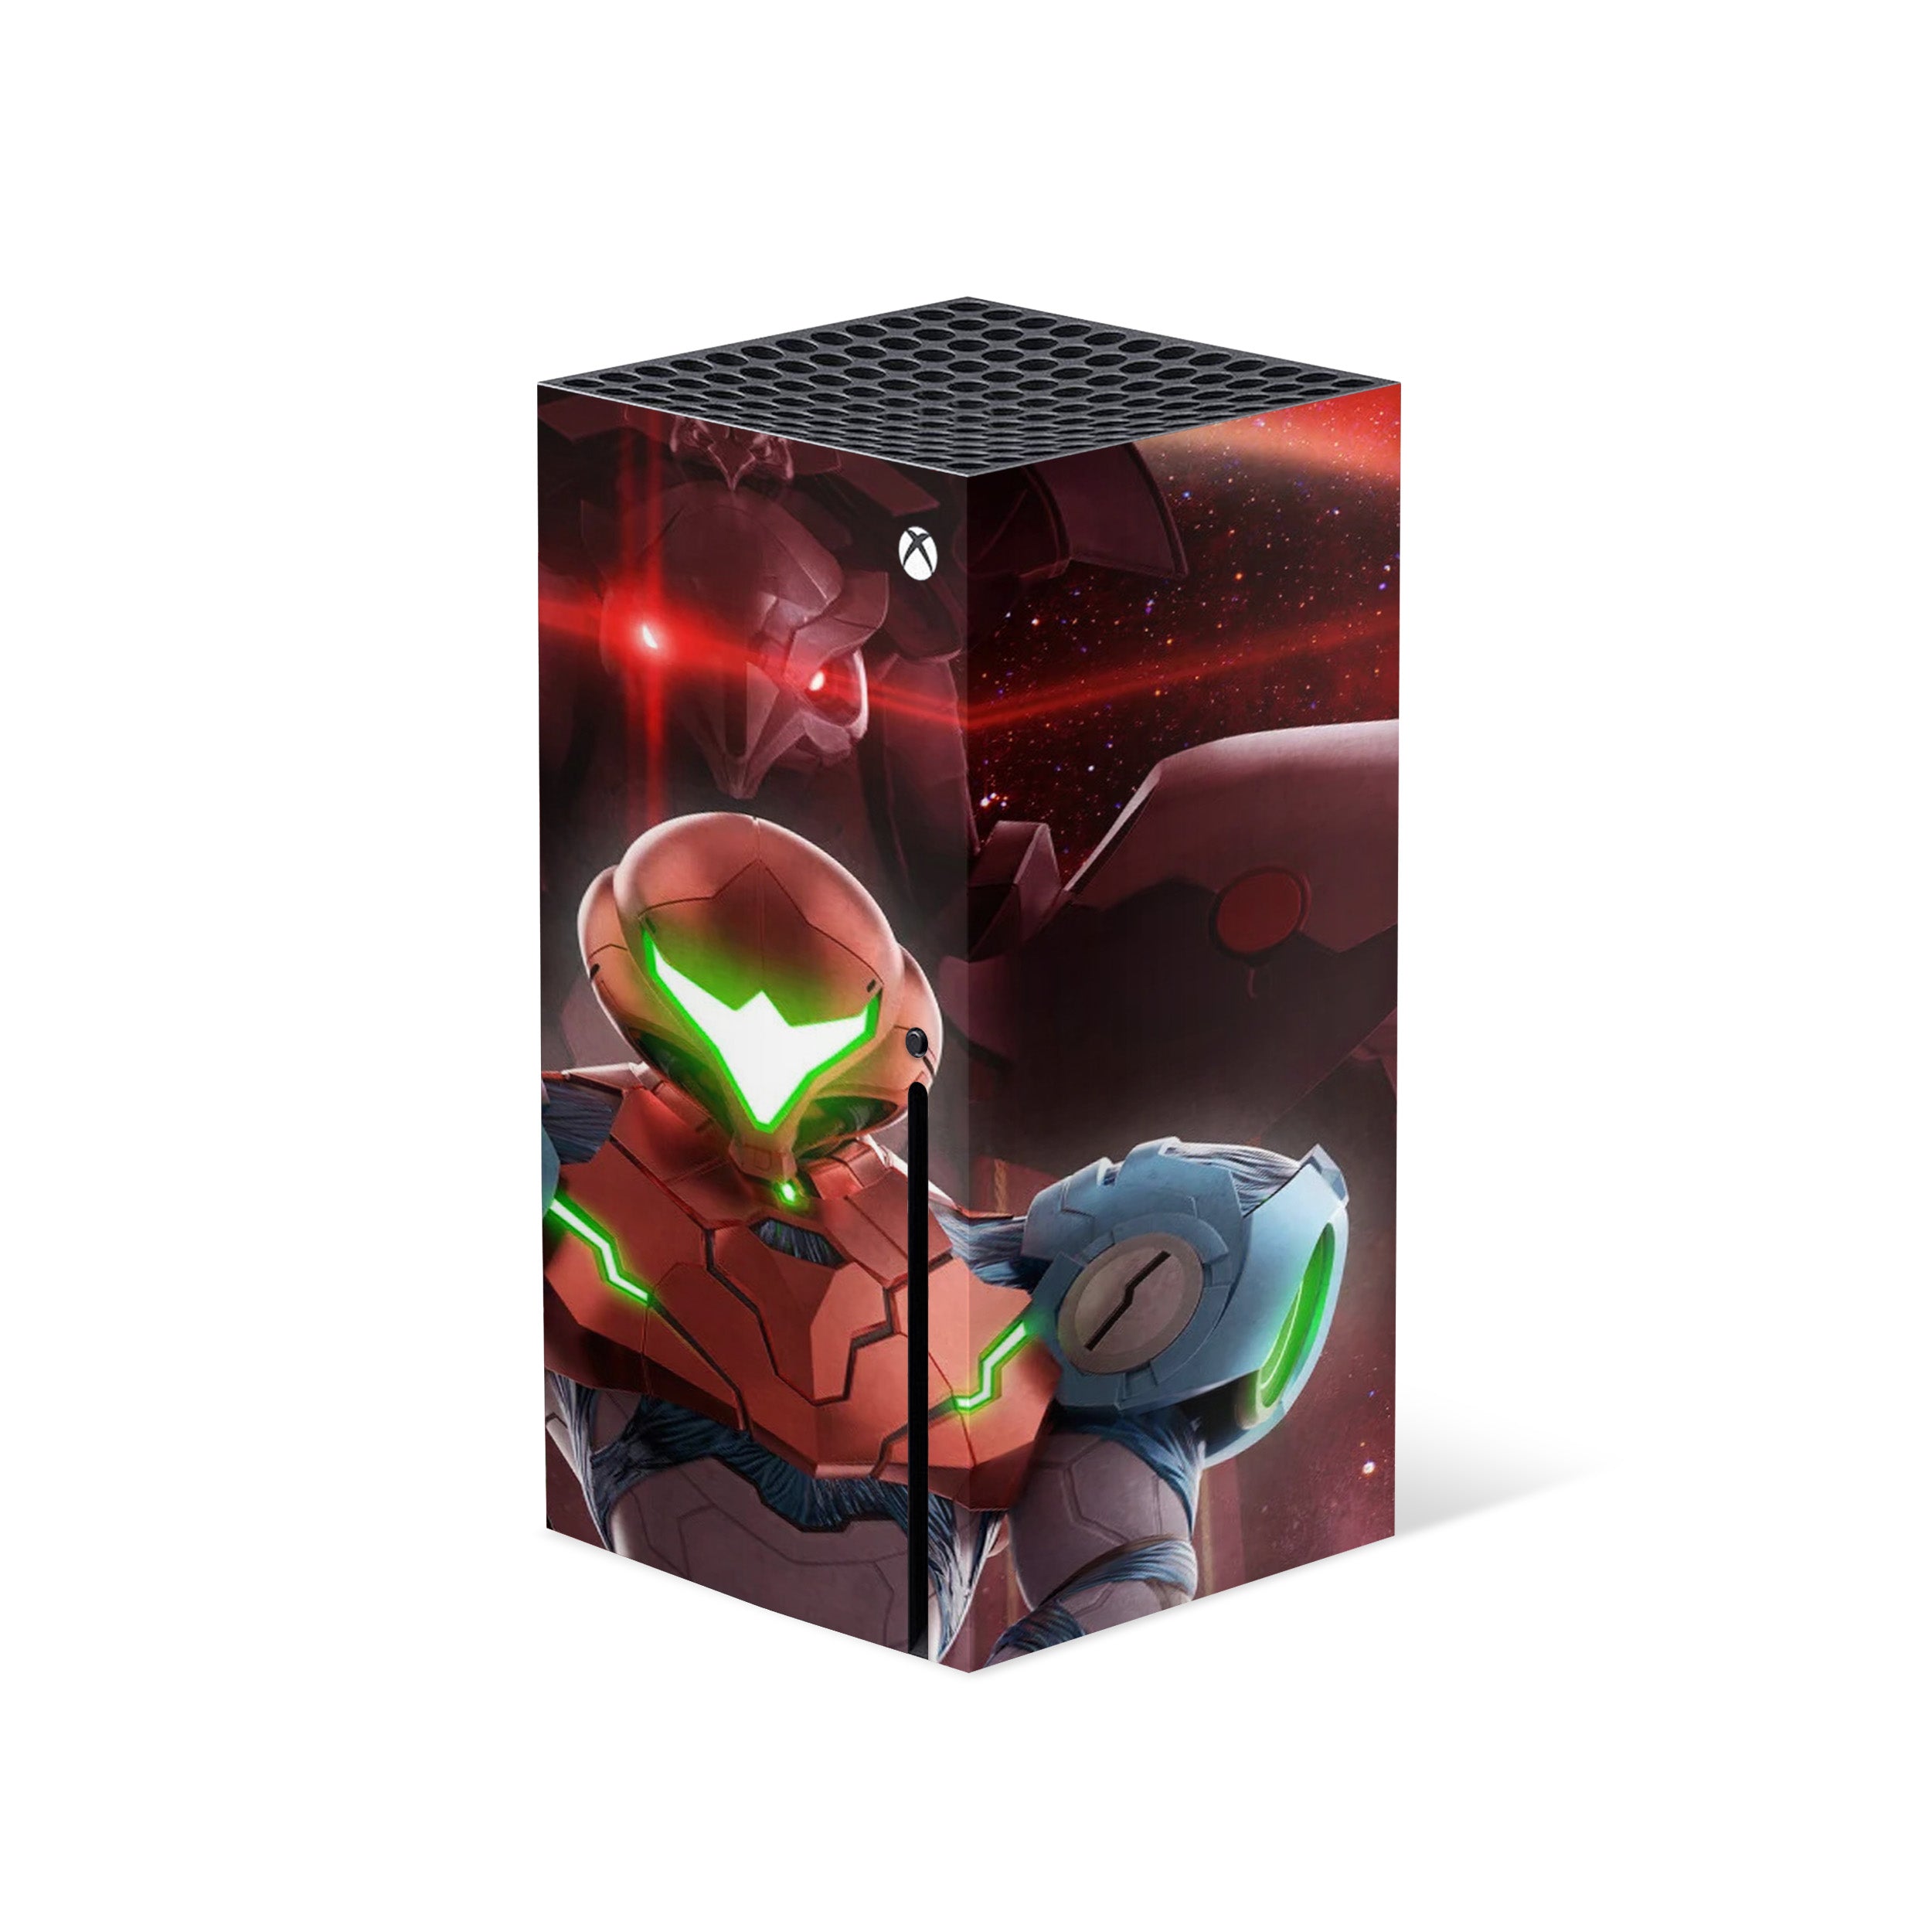 A video game skin featuring a Metroid Dread design for the Xbox Series X.